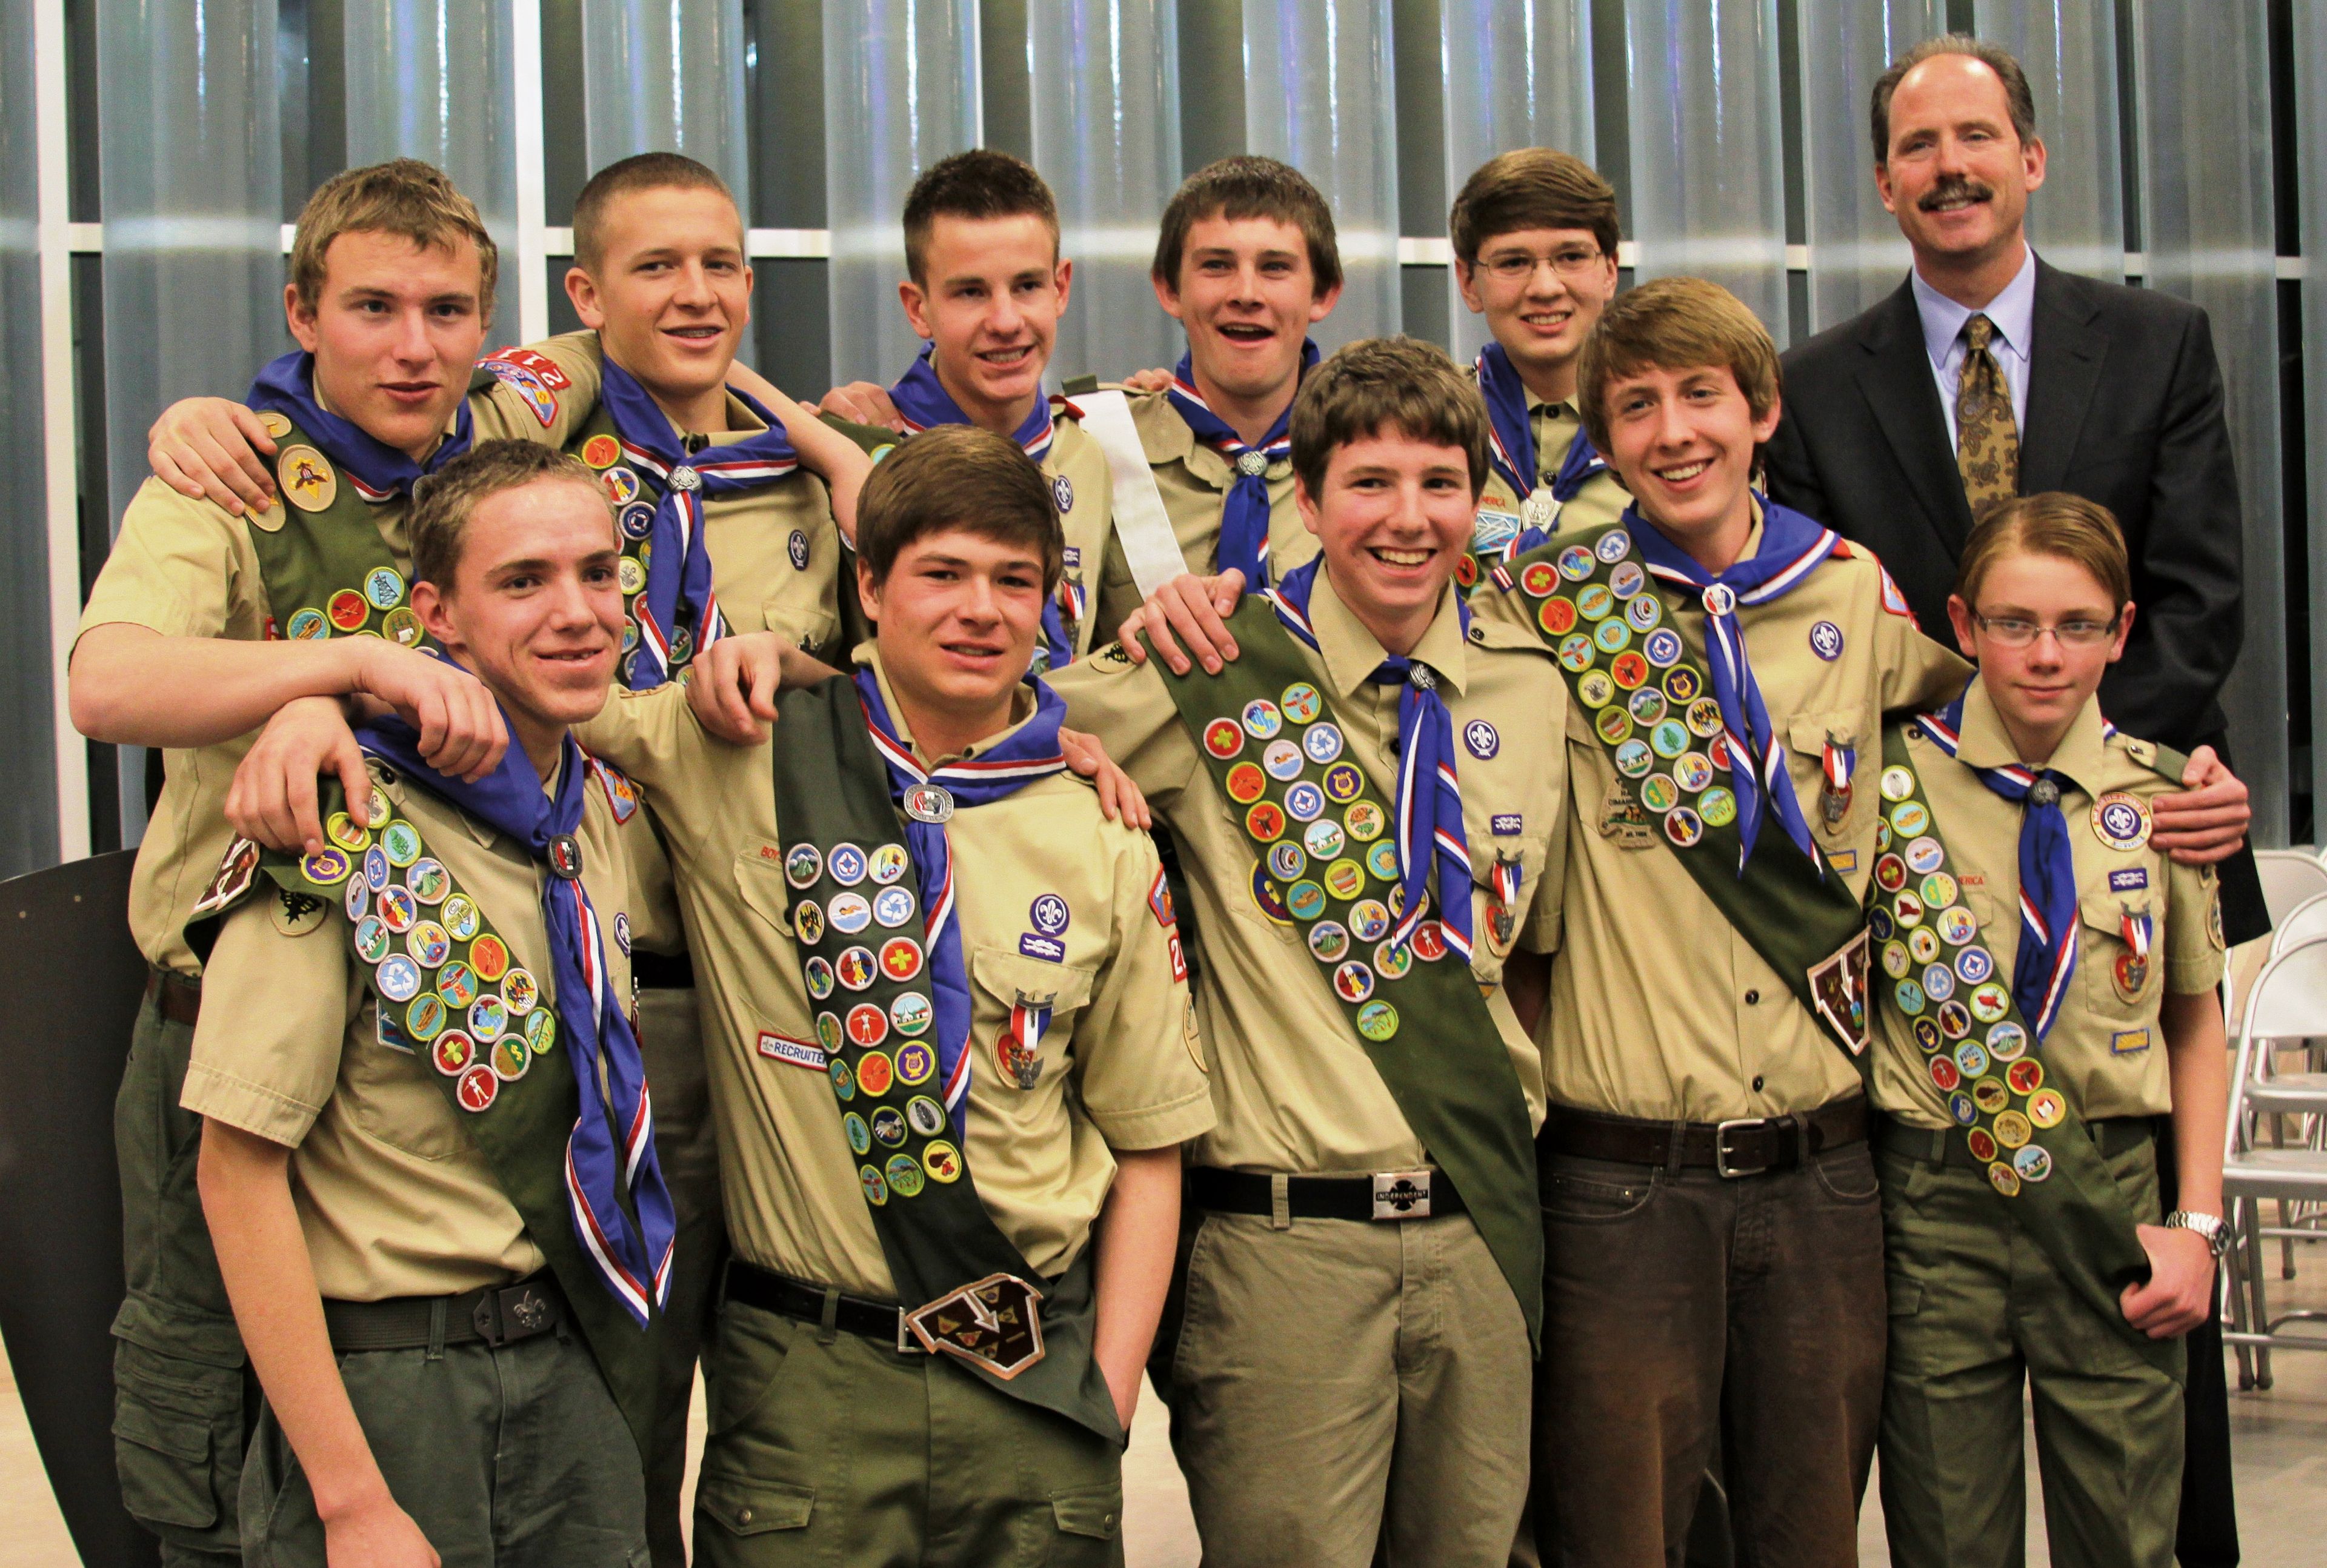 A group of young men stand together for a picture as Boy Scouts.